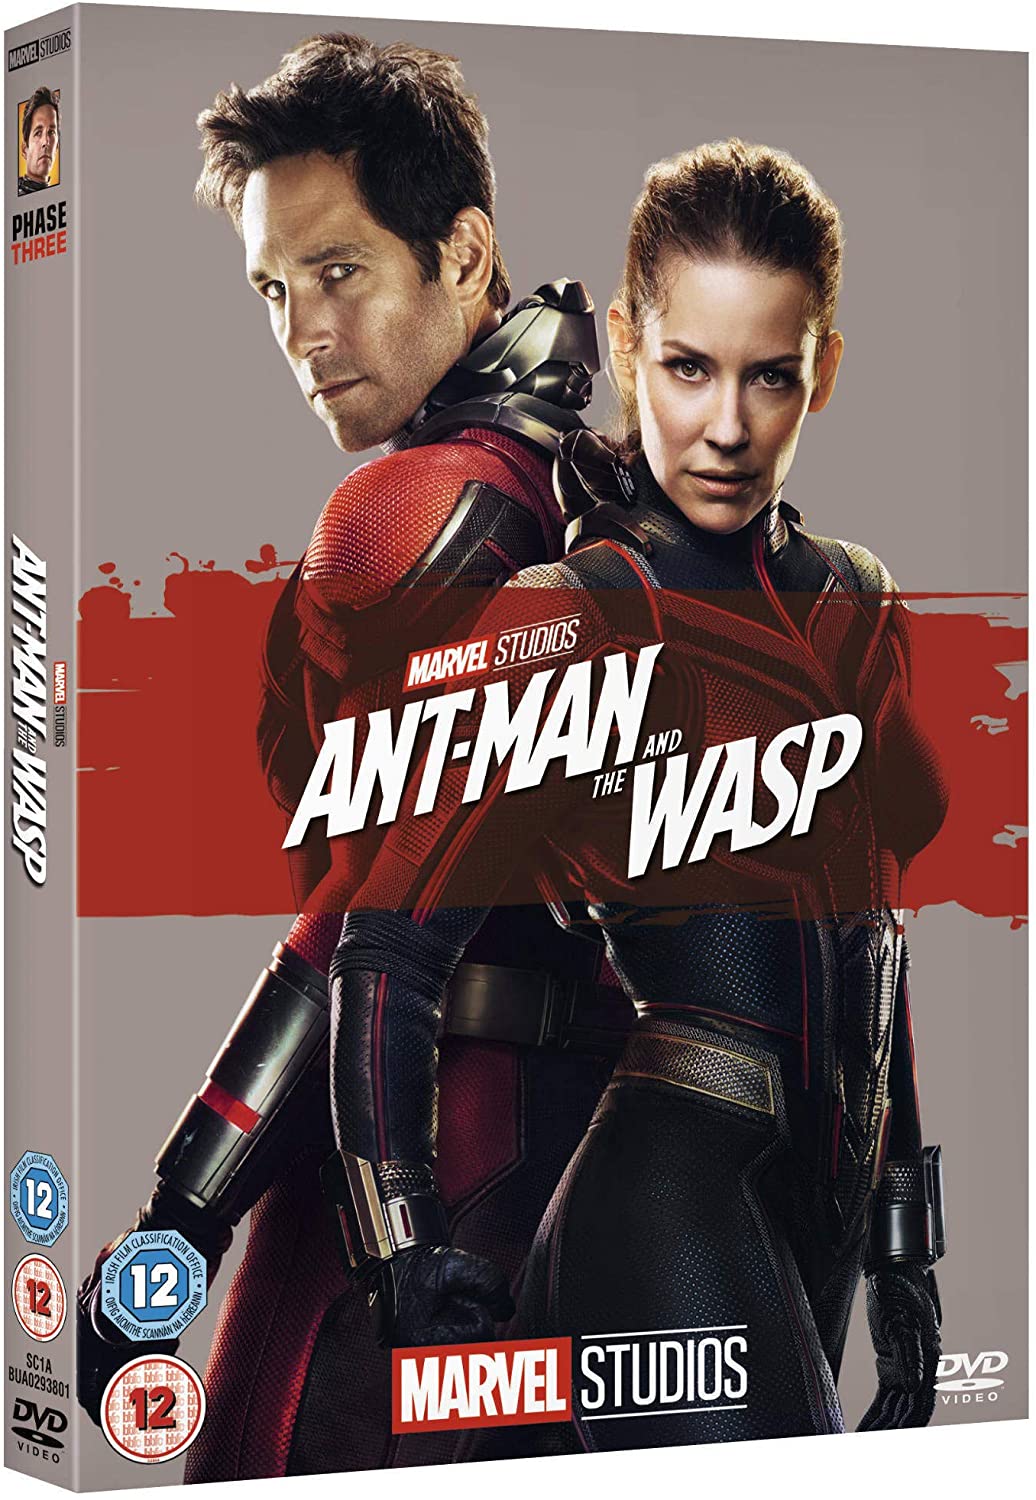 Marvel Studios Ant-Man and the Wasp [DVD]